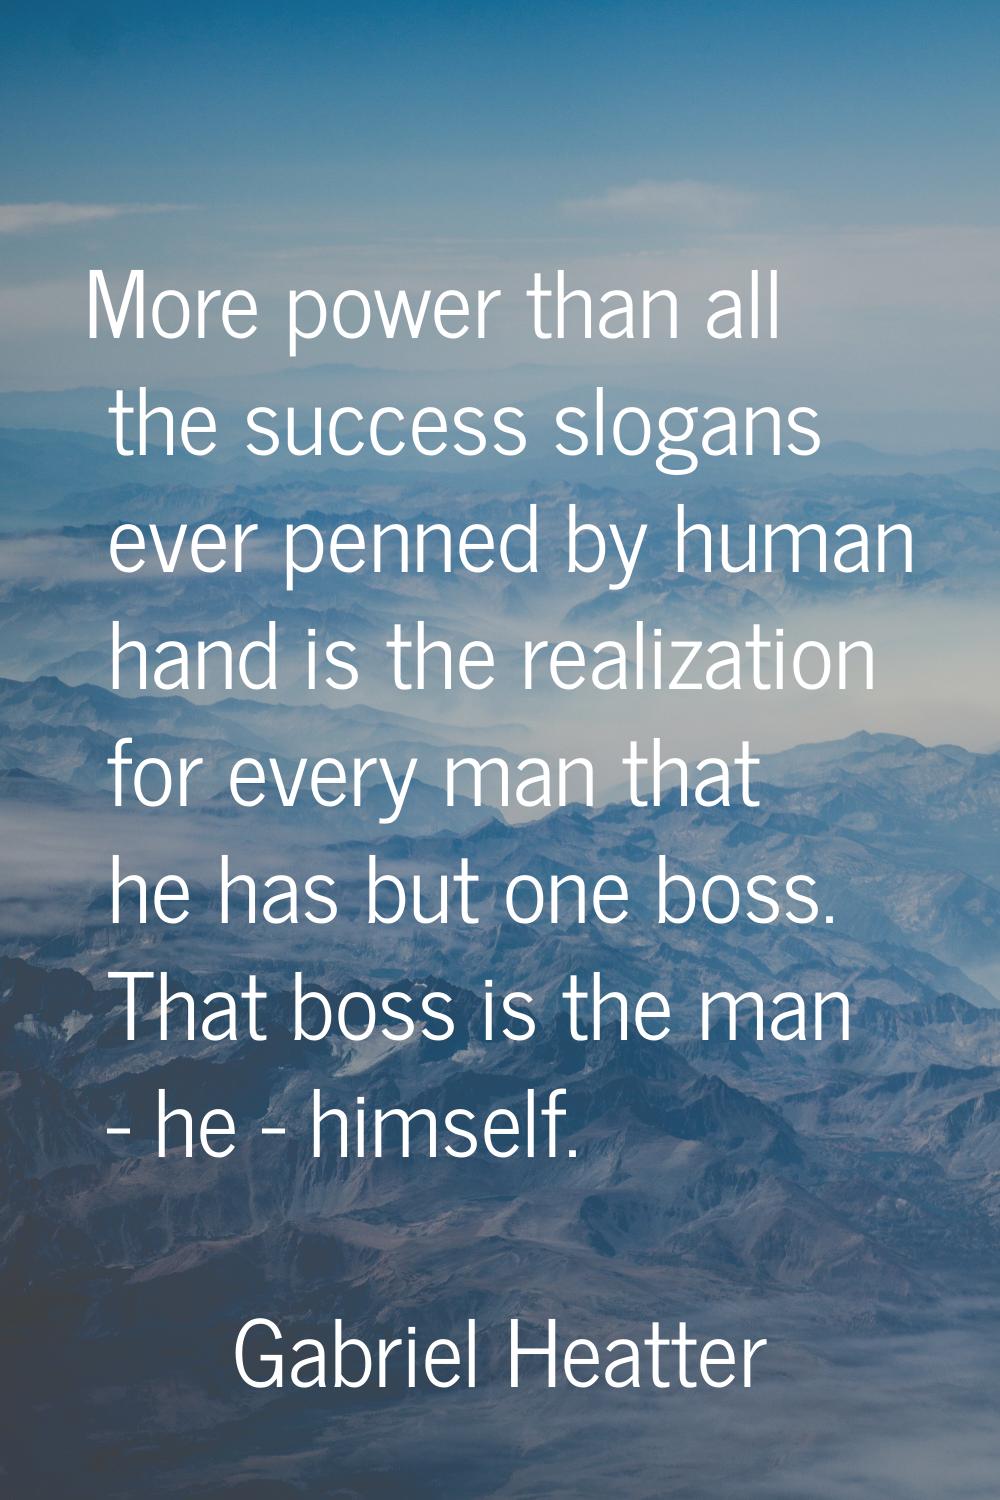 More power than all the success slogans ever penned by human hand is the realization for every man 